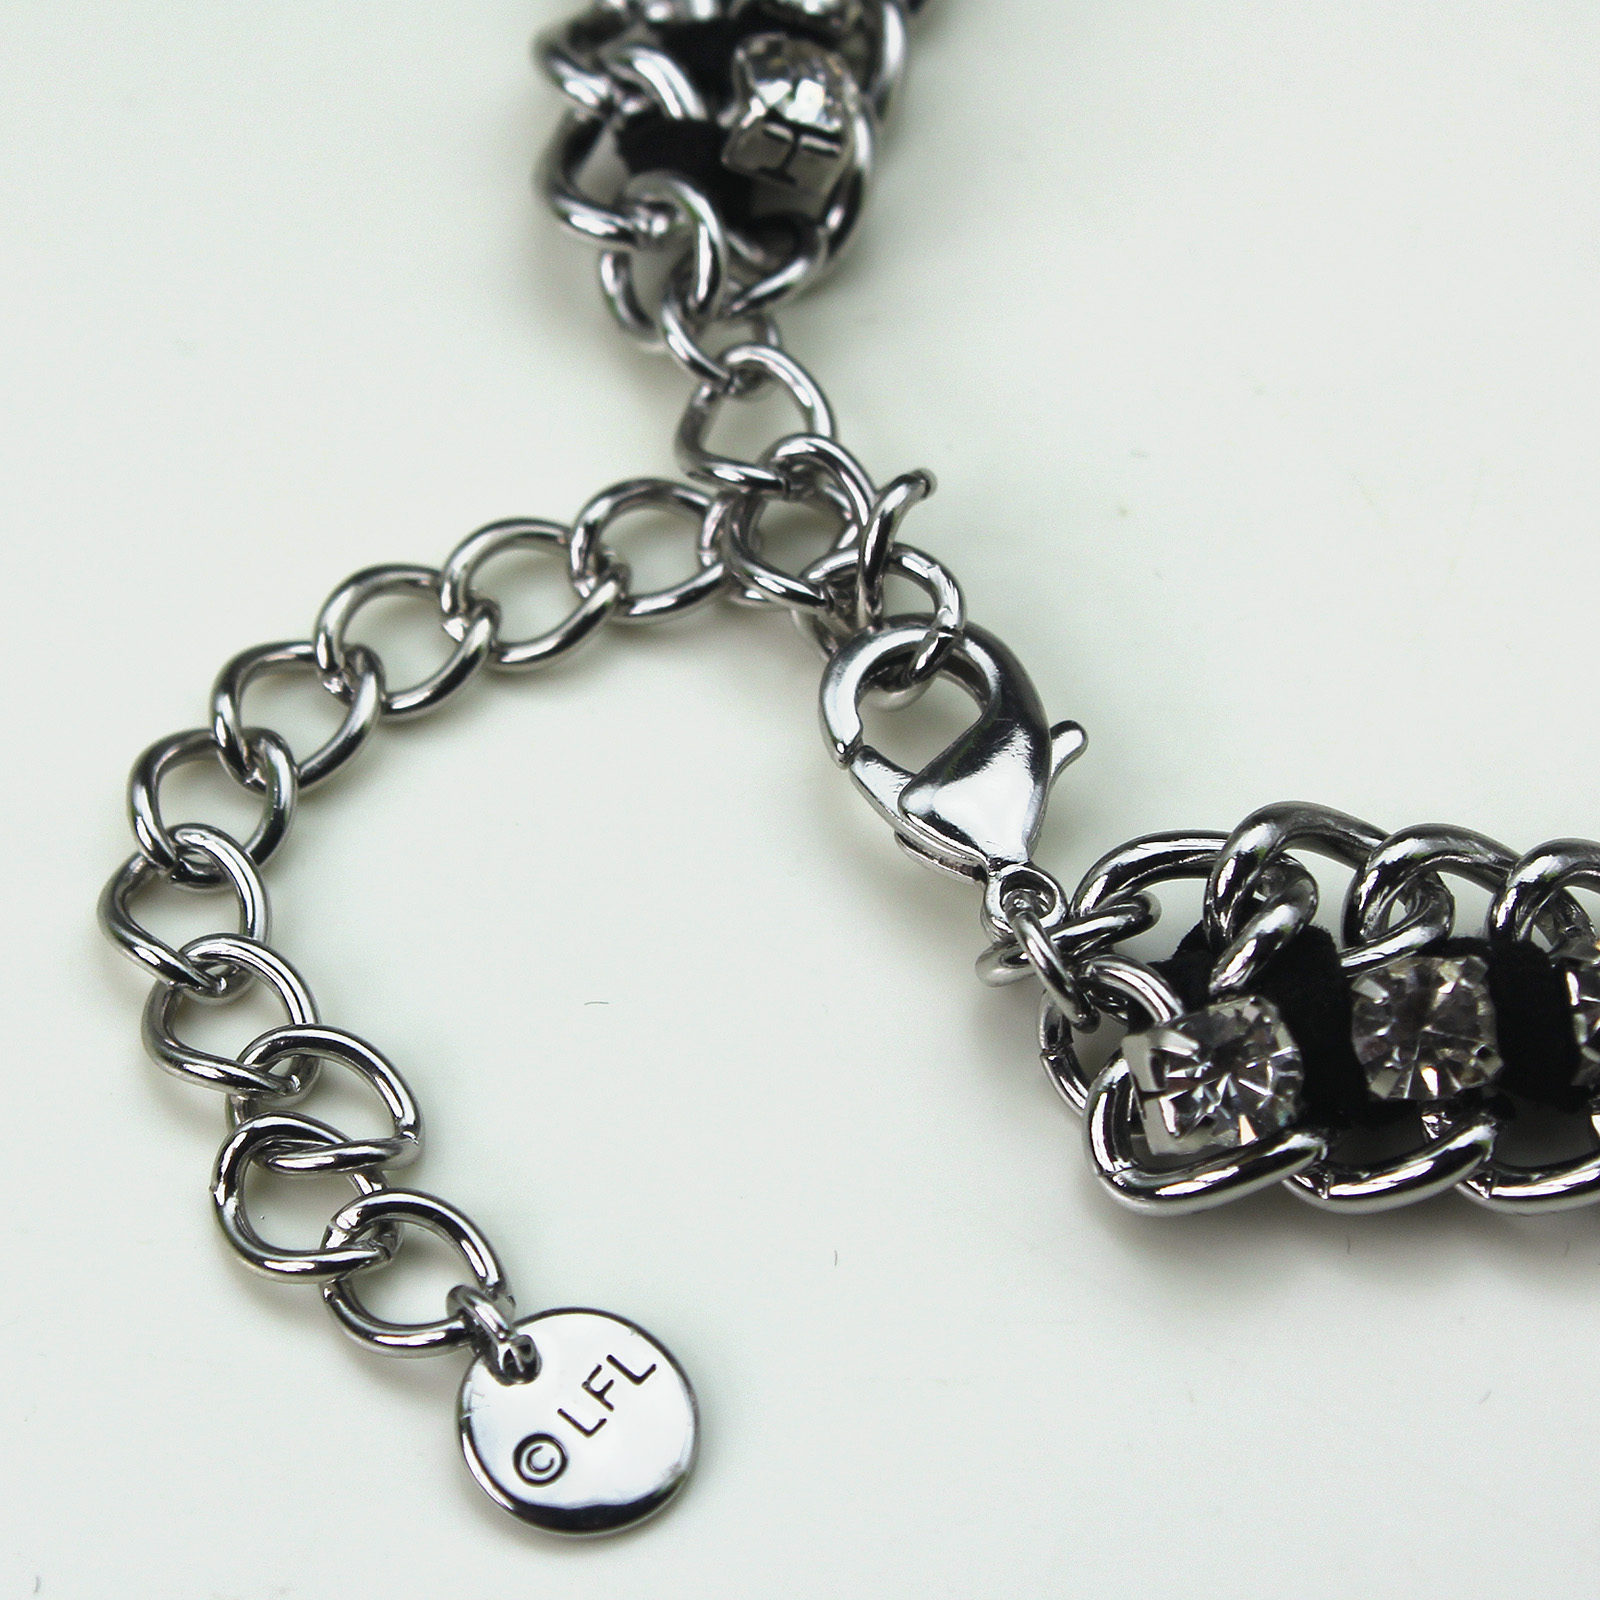 HSN - 'bling' Stormtrooper helmet necklace by SG@NYC, LLC (chain detail)